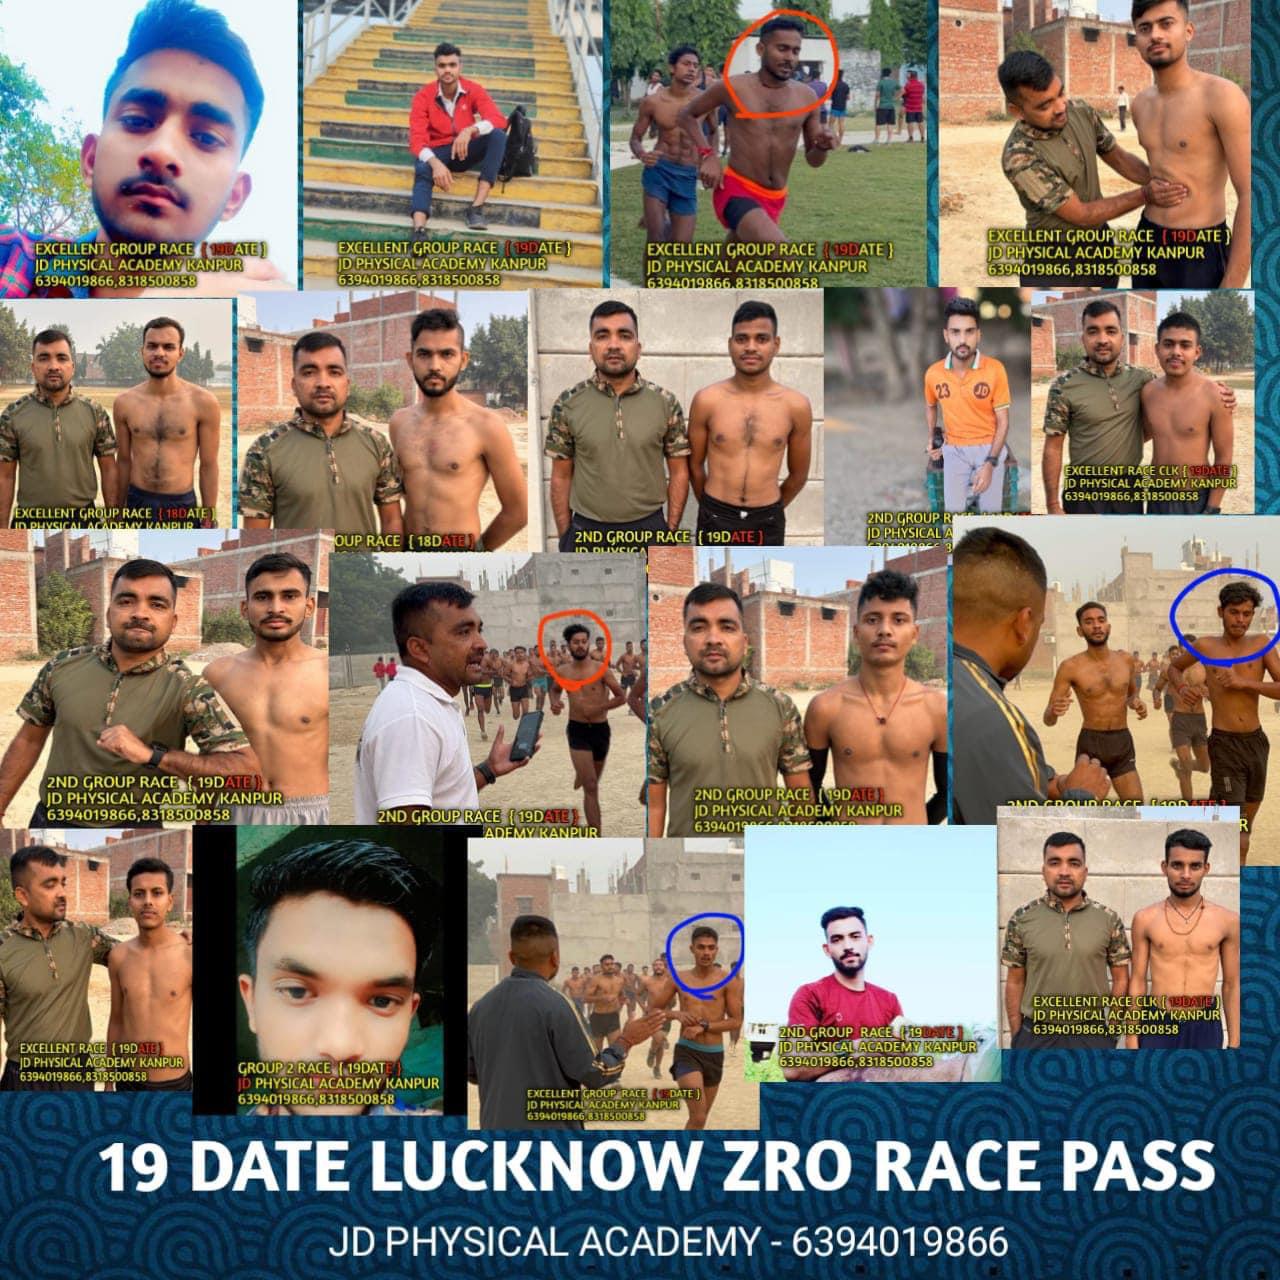 AGNIVEER INDIAN ARMY